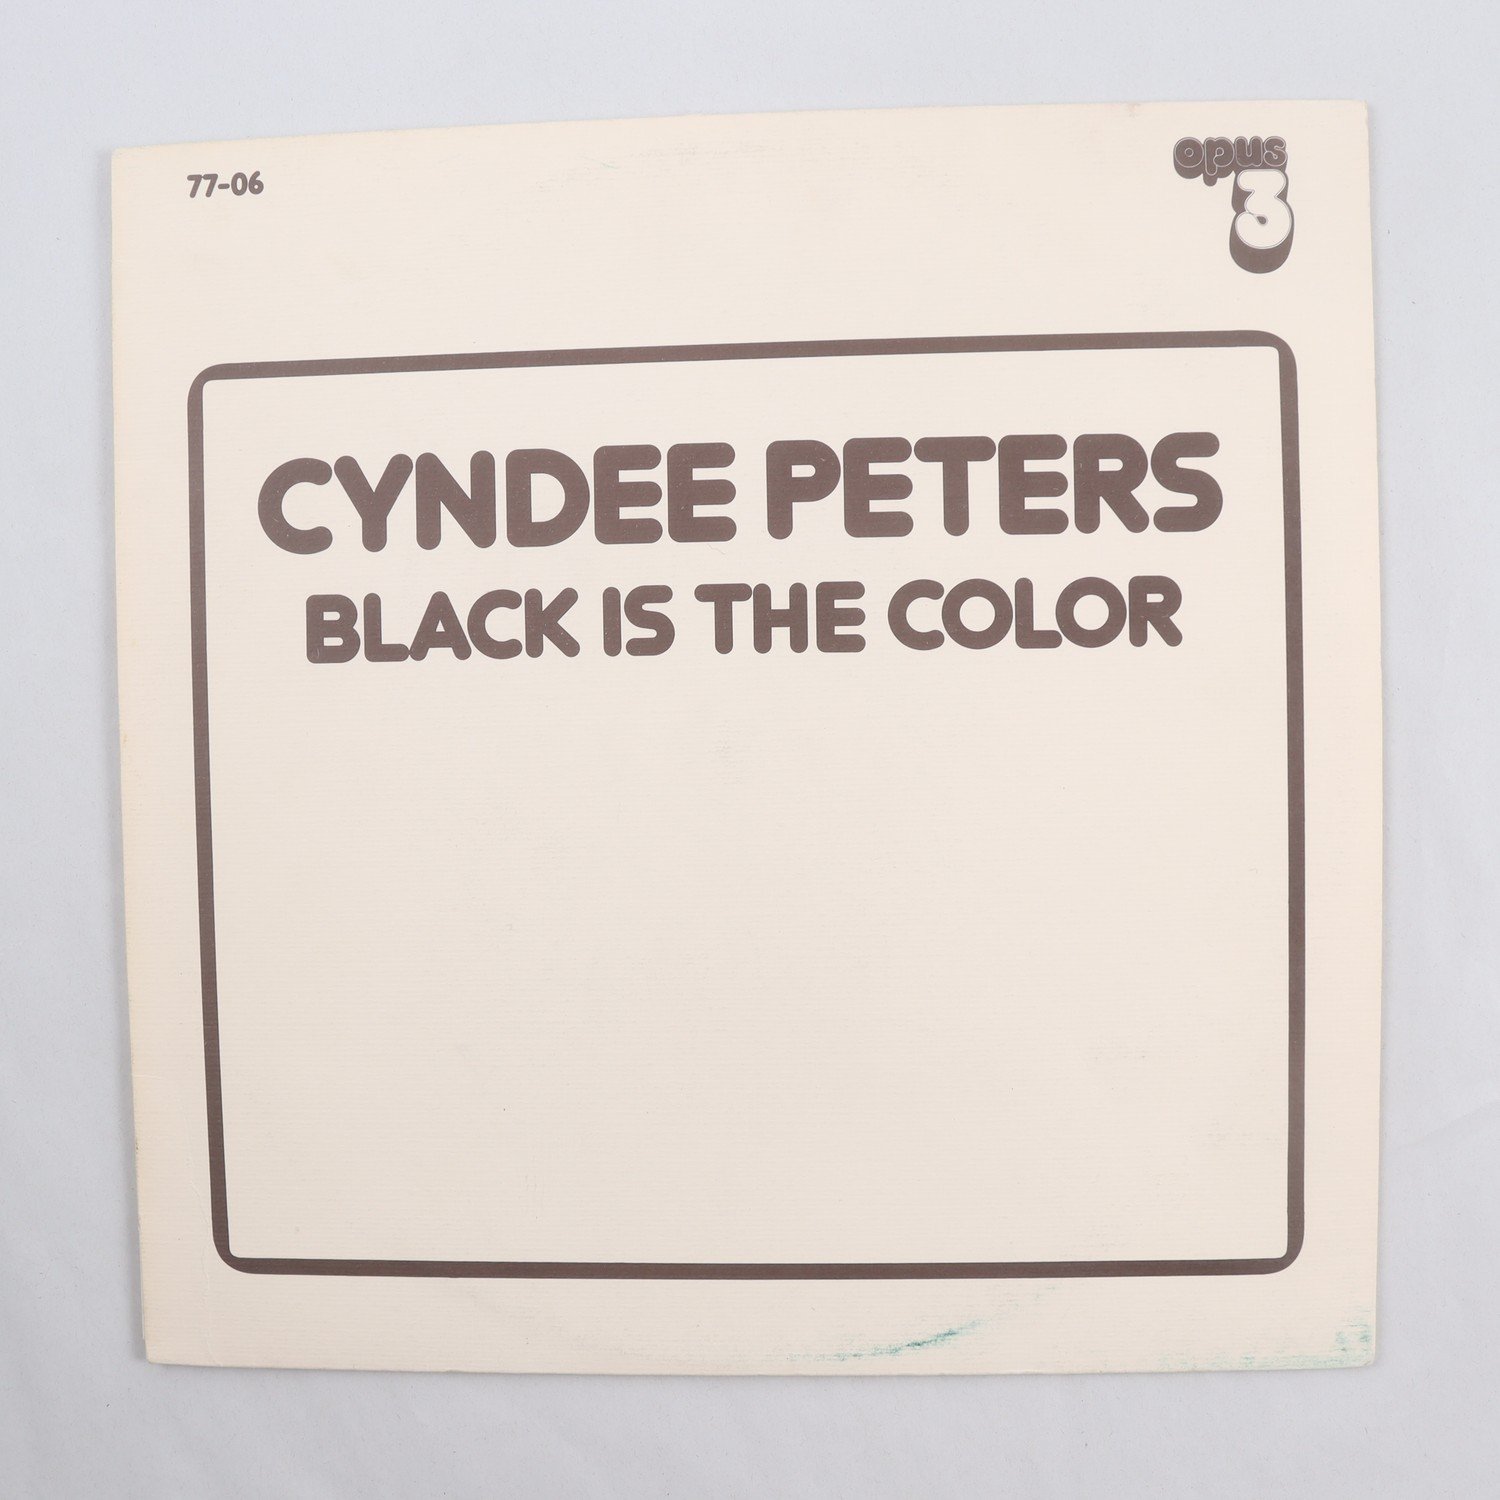 LP Cyndee Peters, Black Is The Color